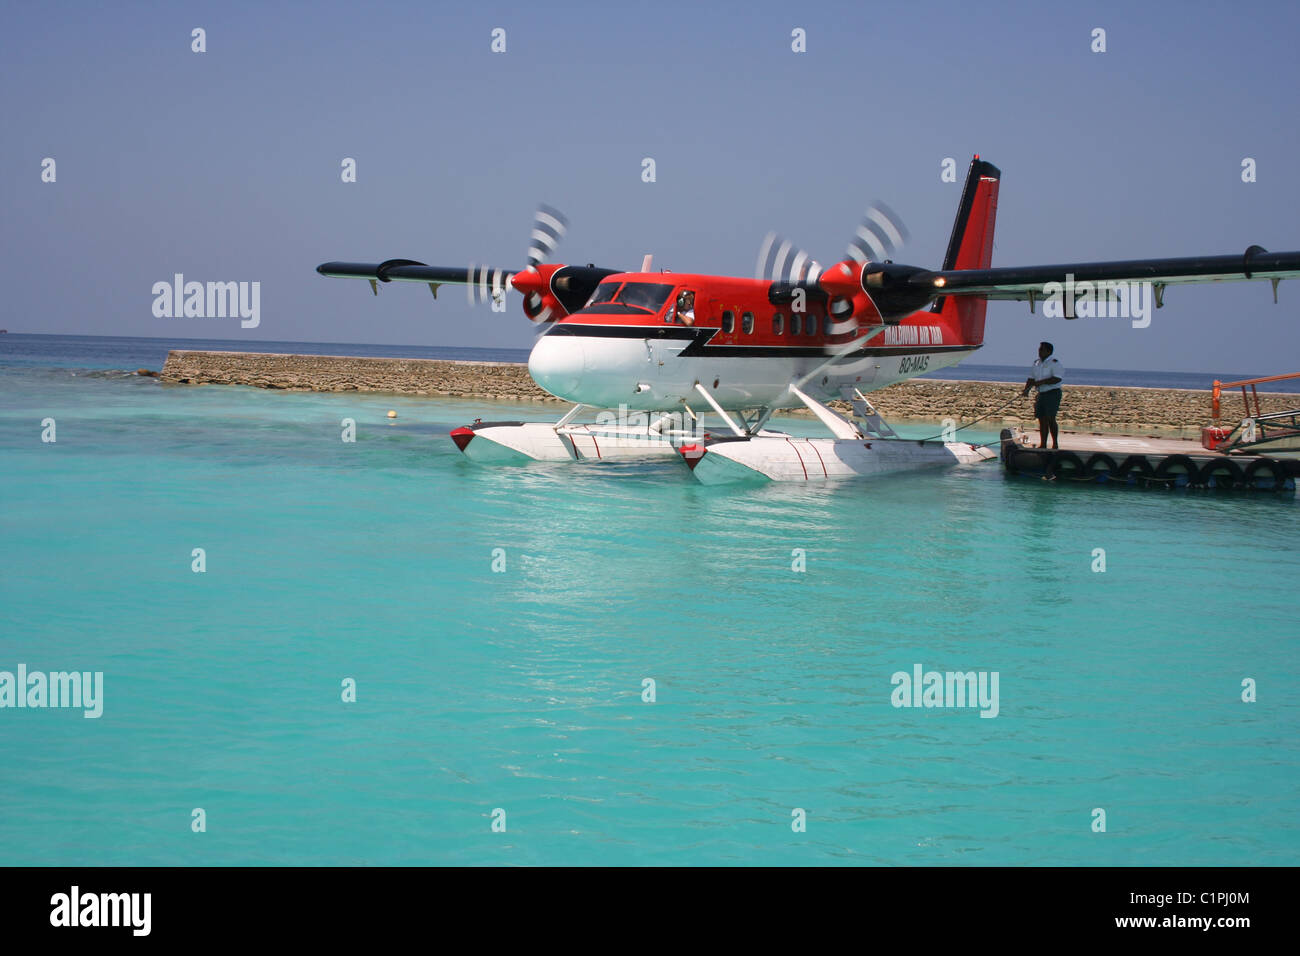 Sea plane sits in water by platform edge, Maldives, Indian Ocean. Stock Photo